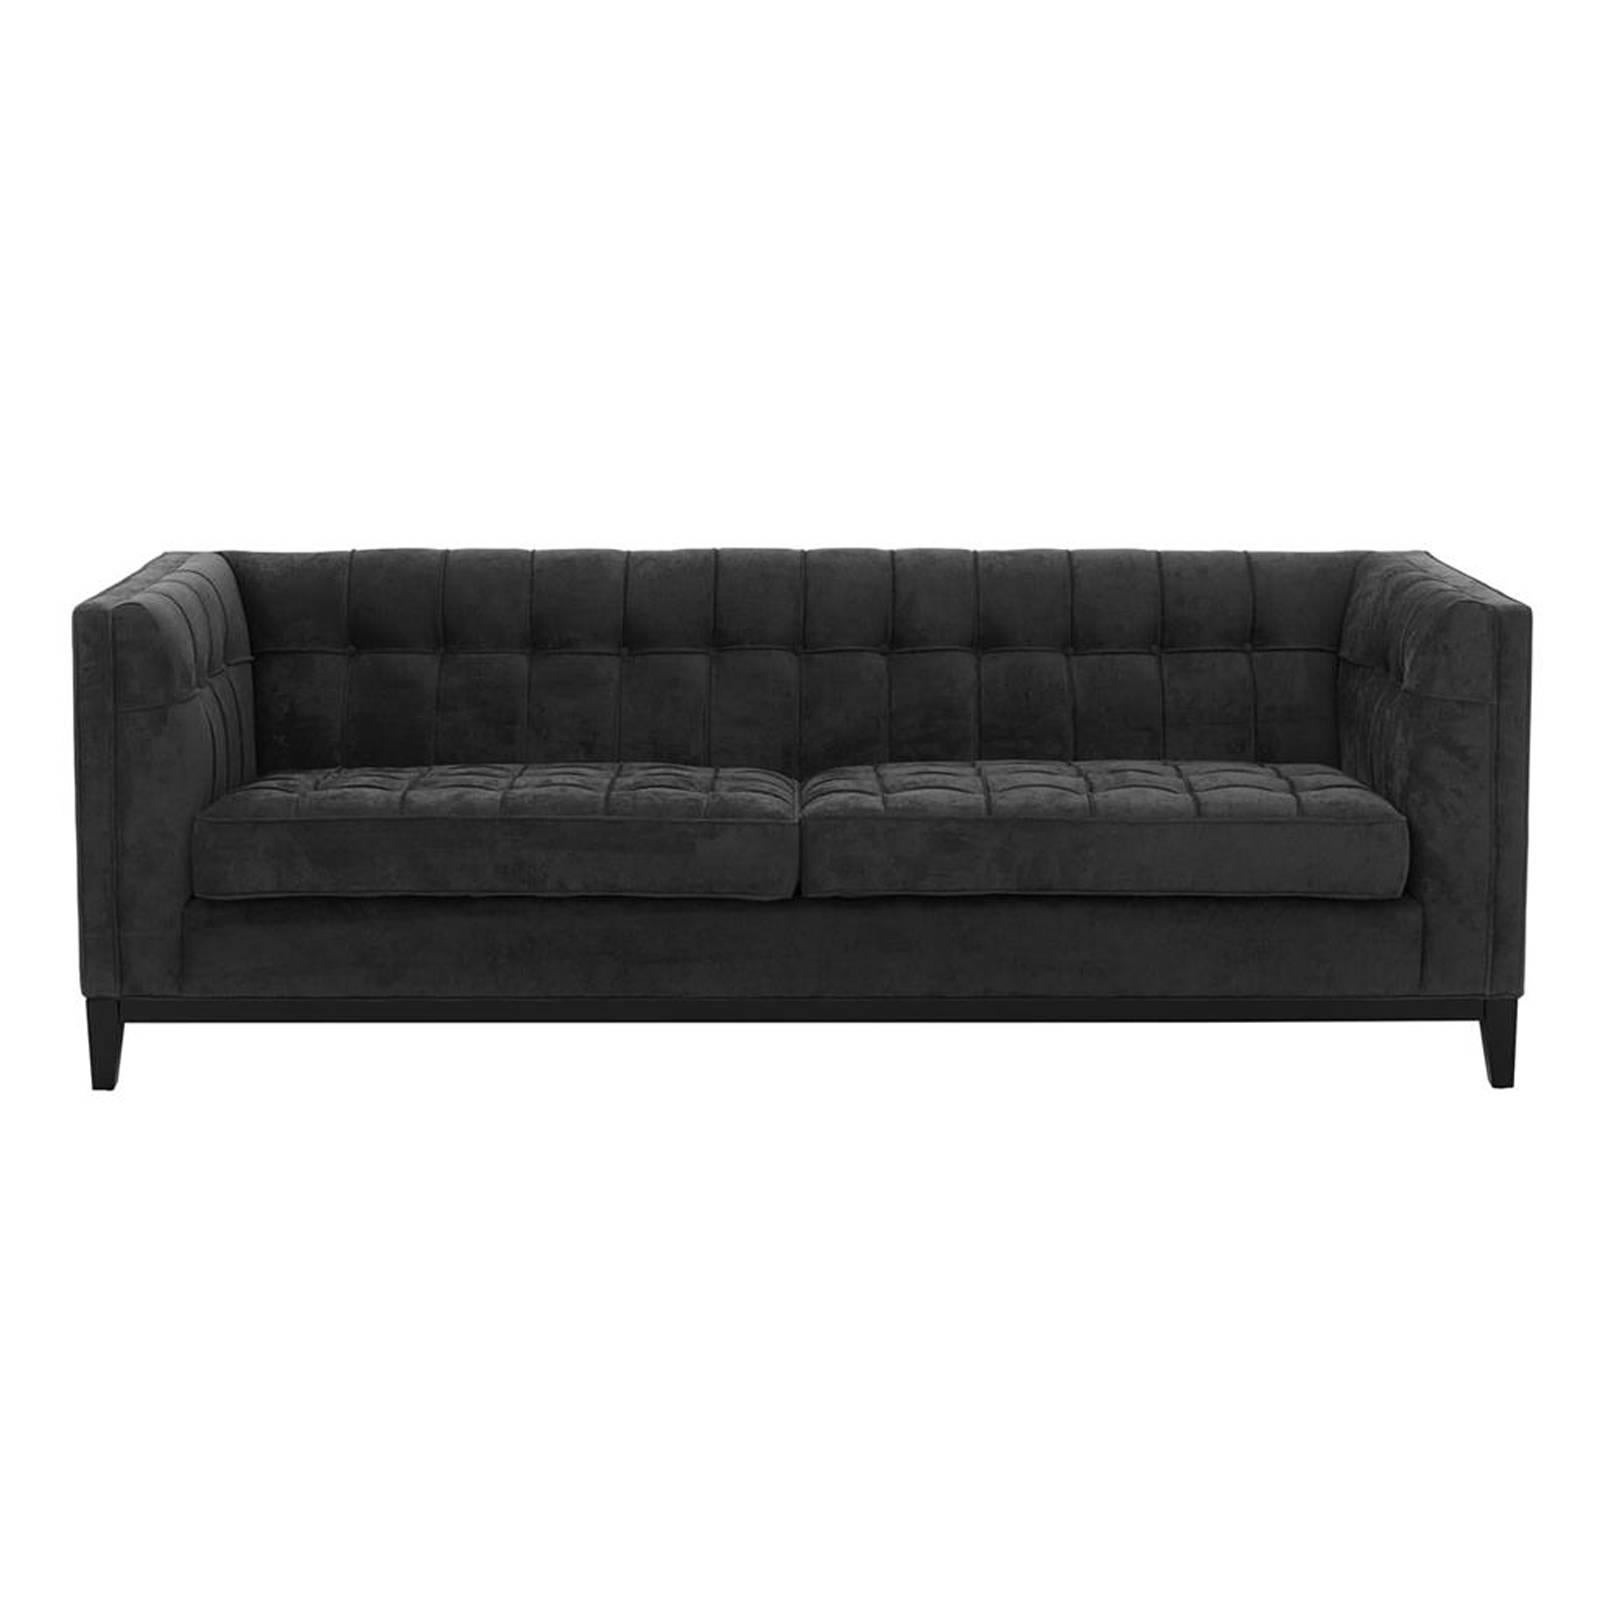 Sofa Sander upholstered with black velvet fabric.
With fire retardant treatment. Structure in solid
birch wood. Also available in greige velvet fabric
or ecru velvet fabric. Also available in Sander
Armchair.
